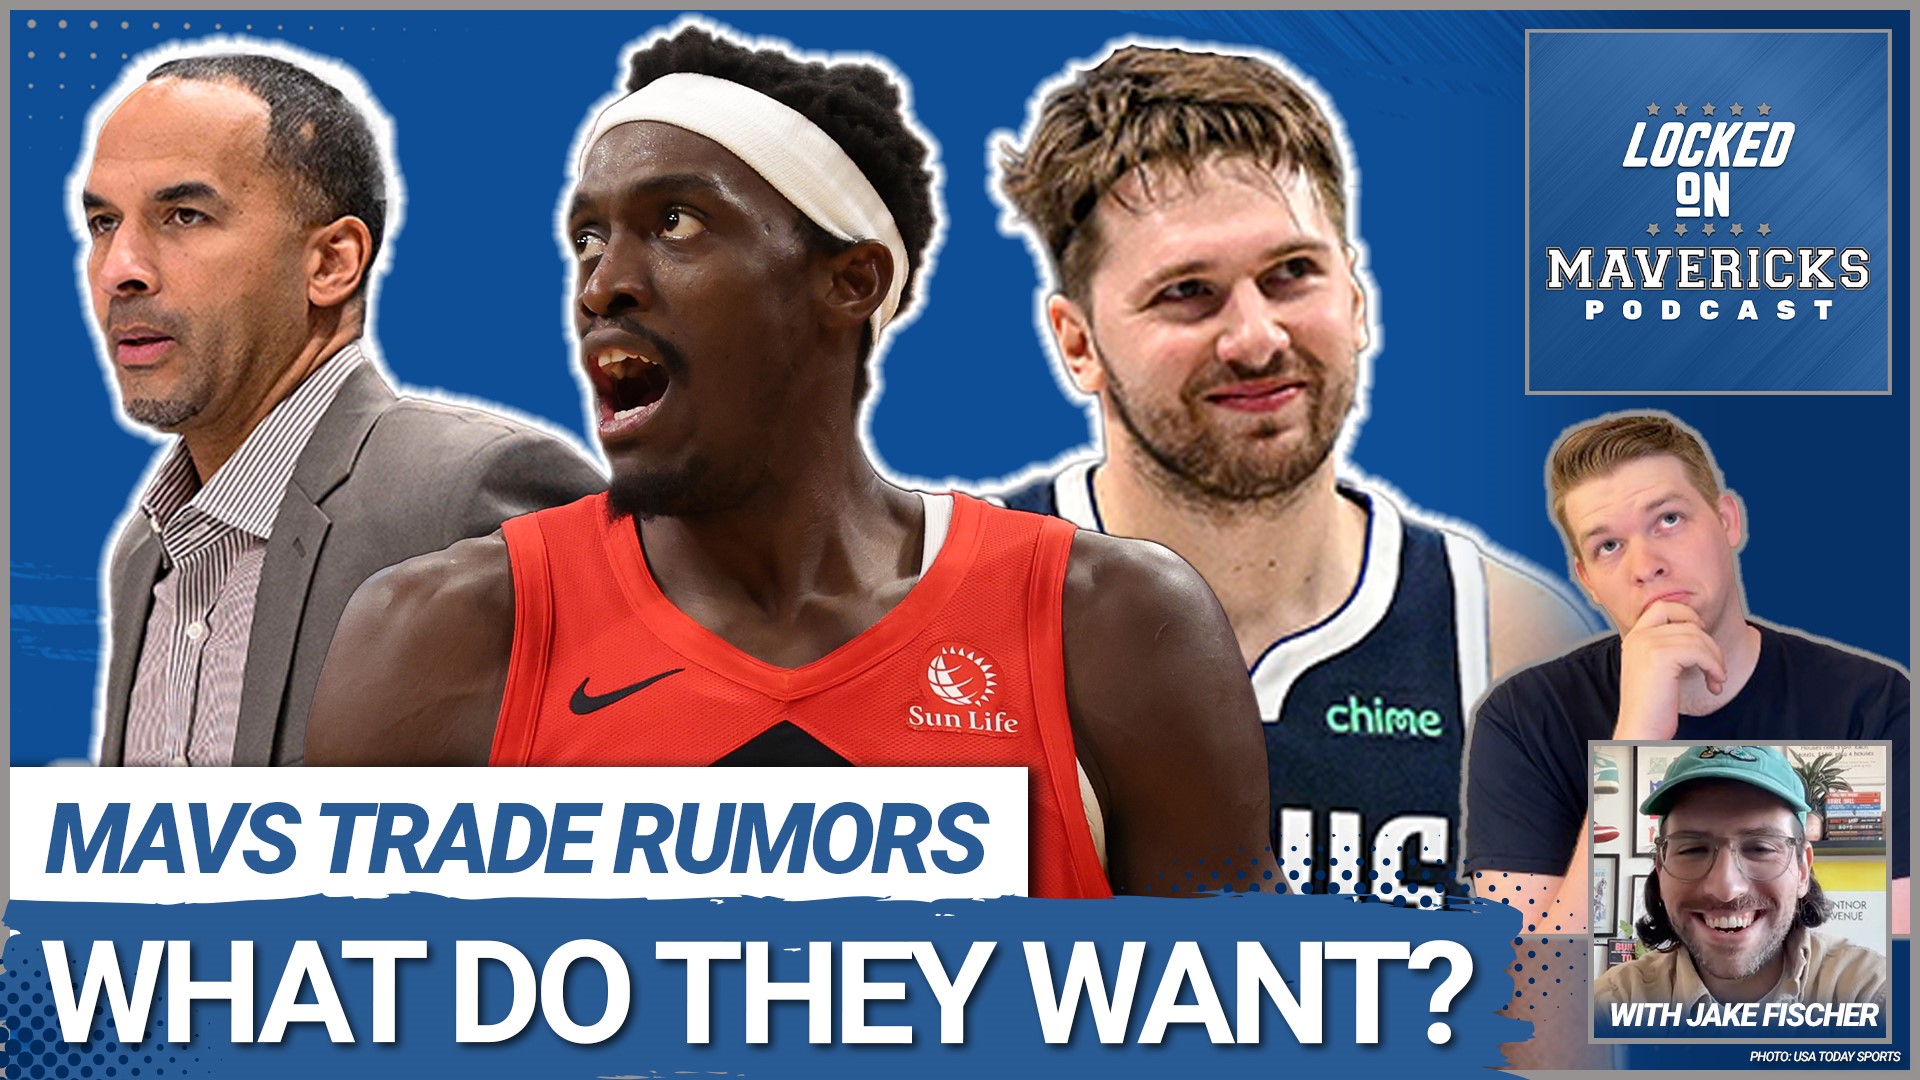 Nick Angstadt is joined by Jake Fischer (Yahoo Sports) to discuss the latest Dallas Mavericks Trade Rumors around Pascal Siakam, what the Mavs want, and more.